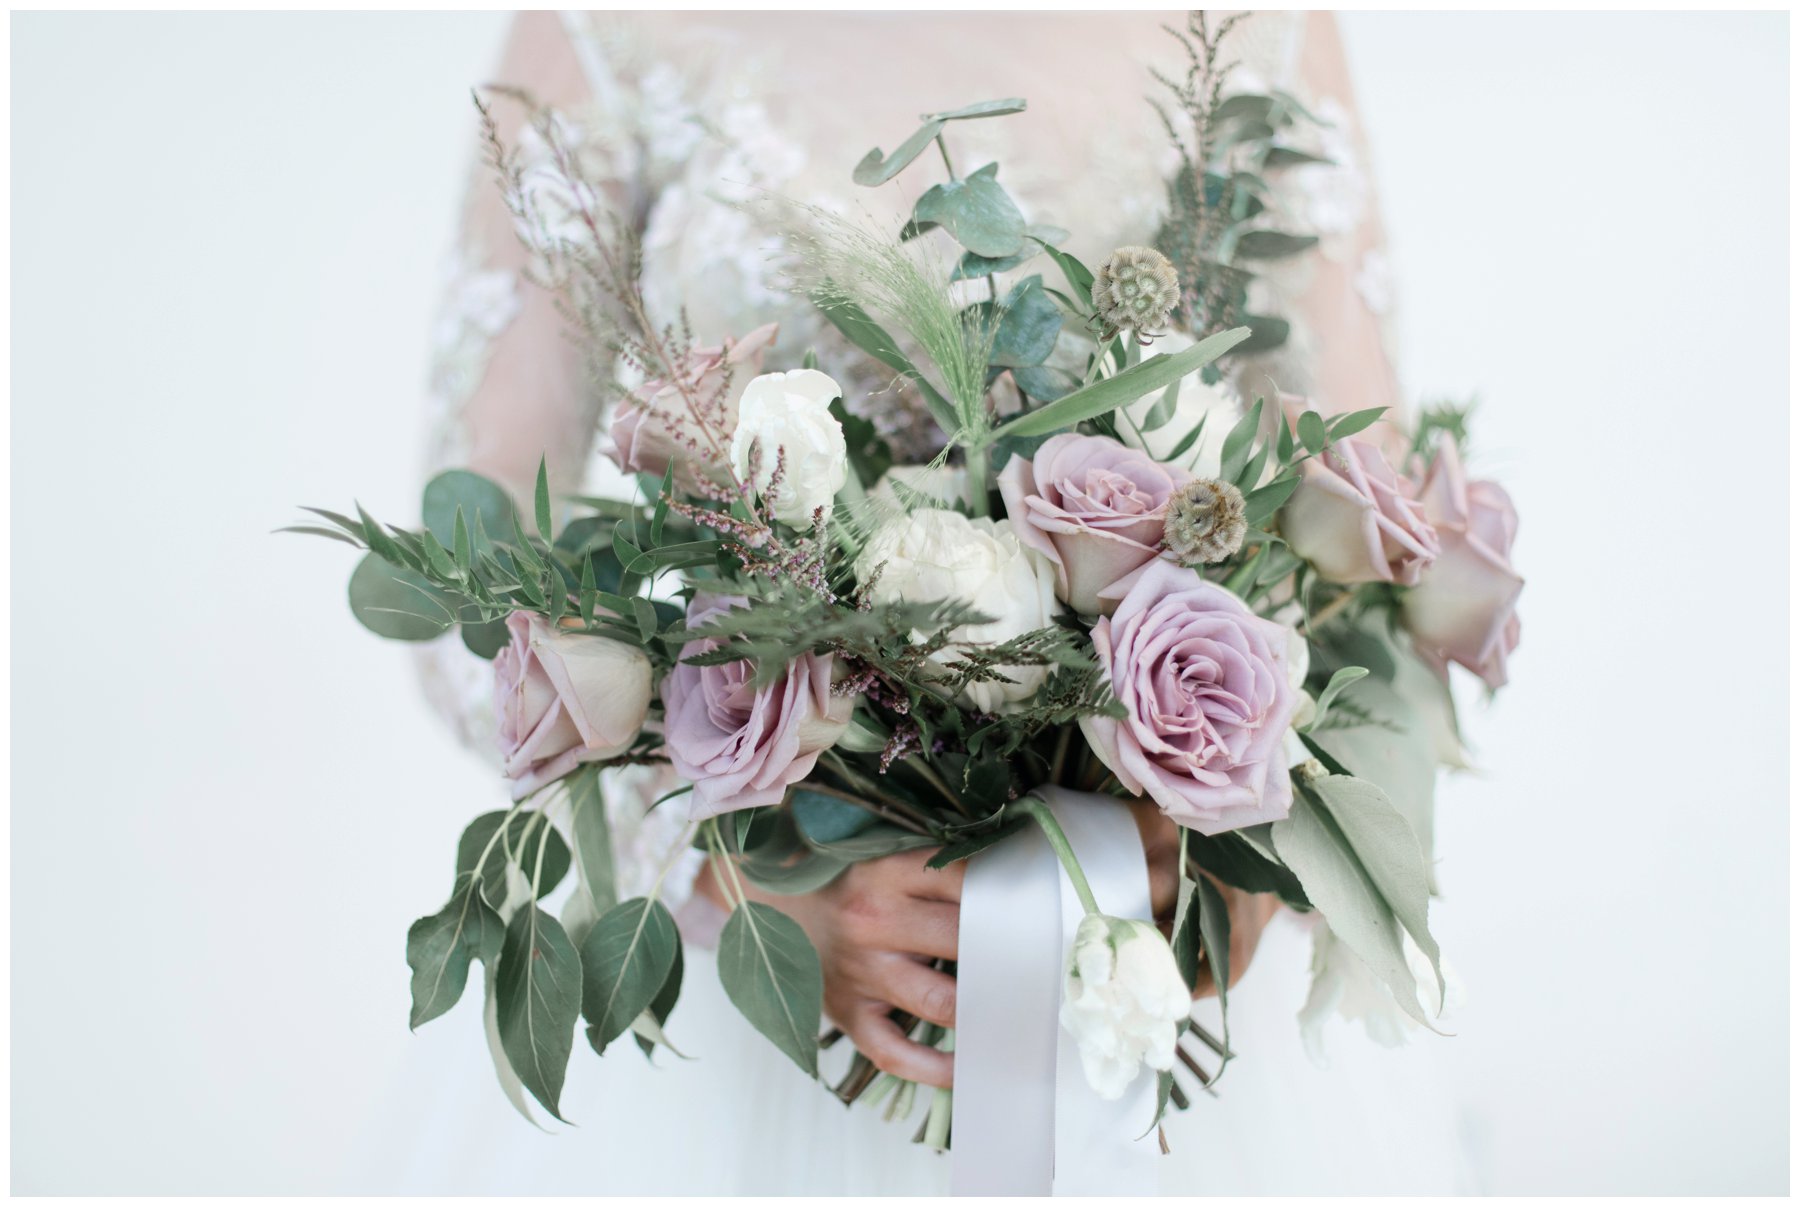 Fairytale mauve and white wedding with lots of florals by Capital Florist- Bride with white Nicole Spose’s dress from Sinders Bridal at Ottawa's NAC O'Born room wedding venue: The Barnett Company - Ottawa Wedding Photographer